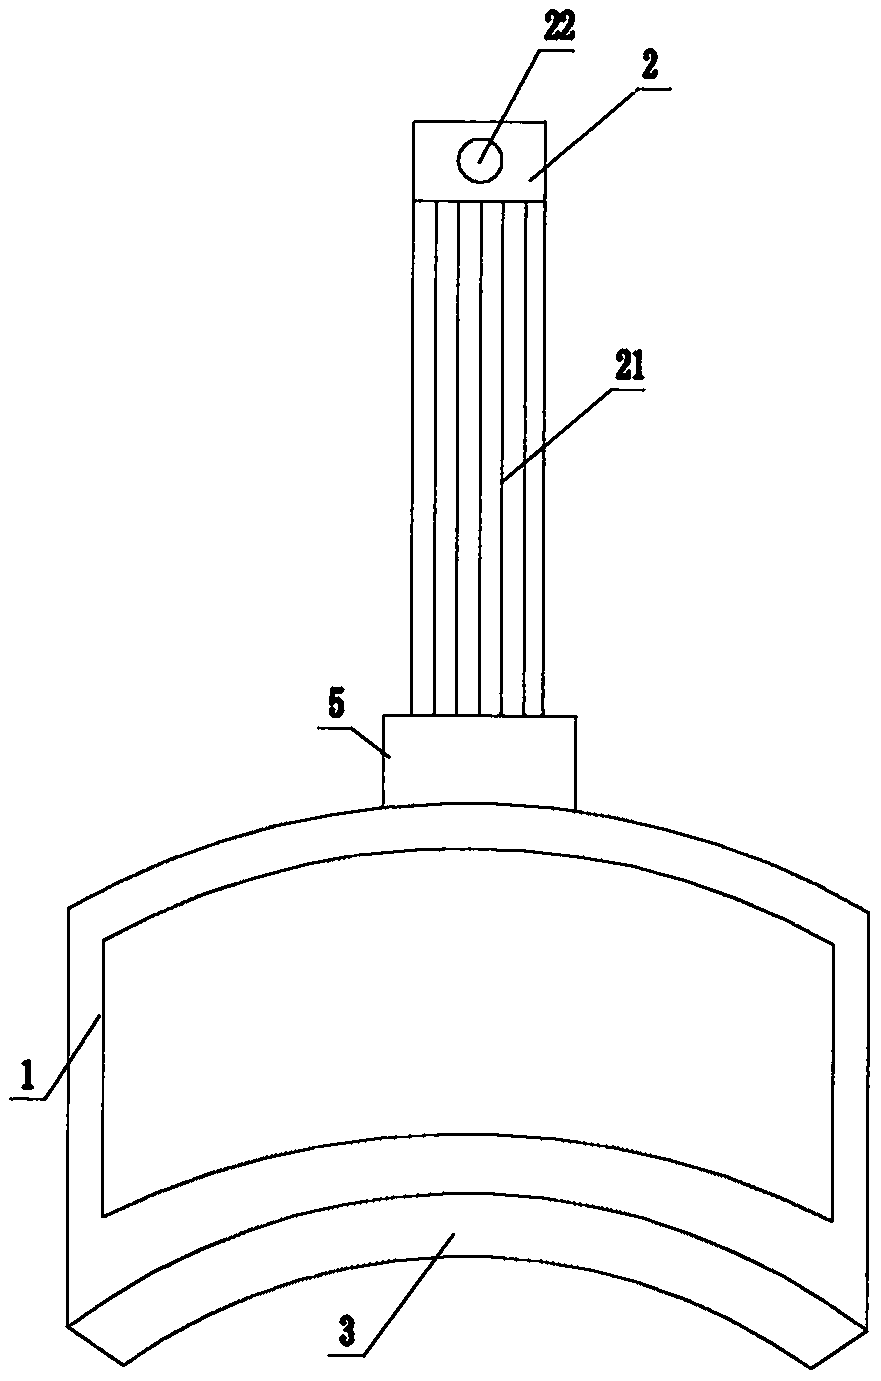 Coupling agent cleaning device